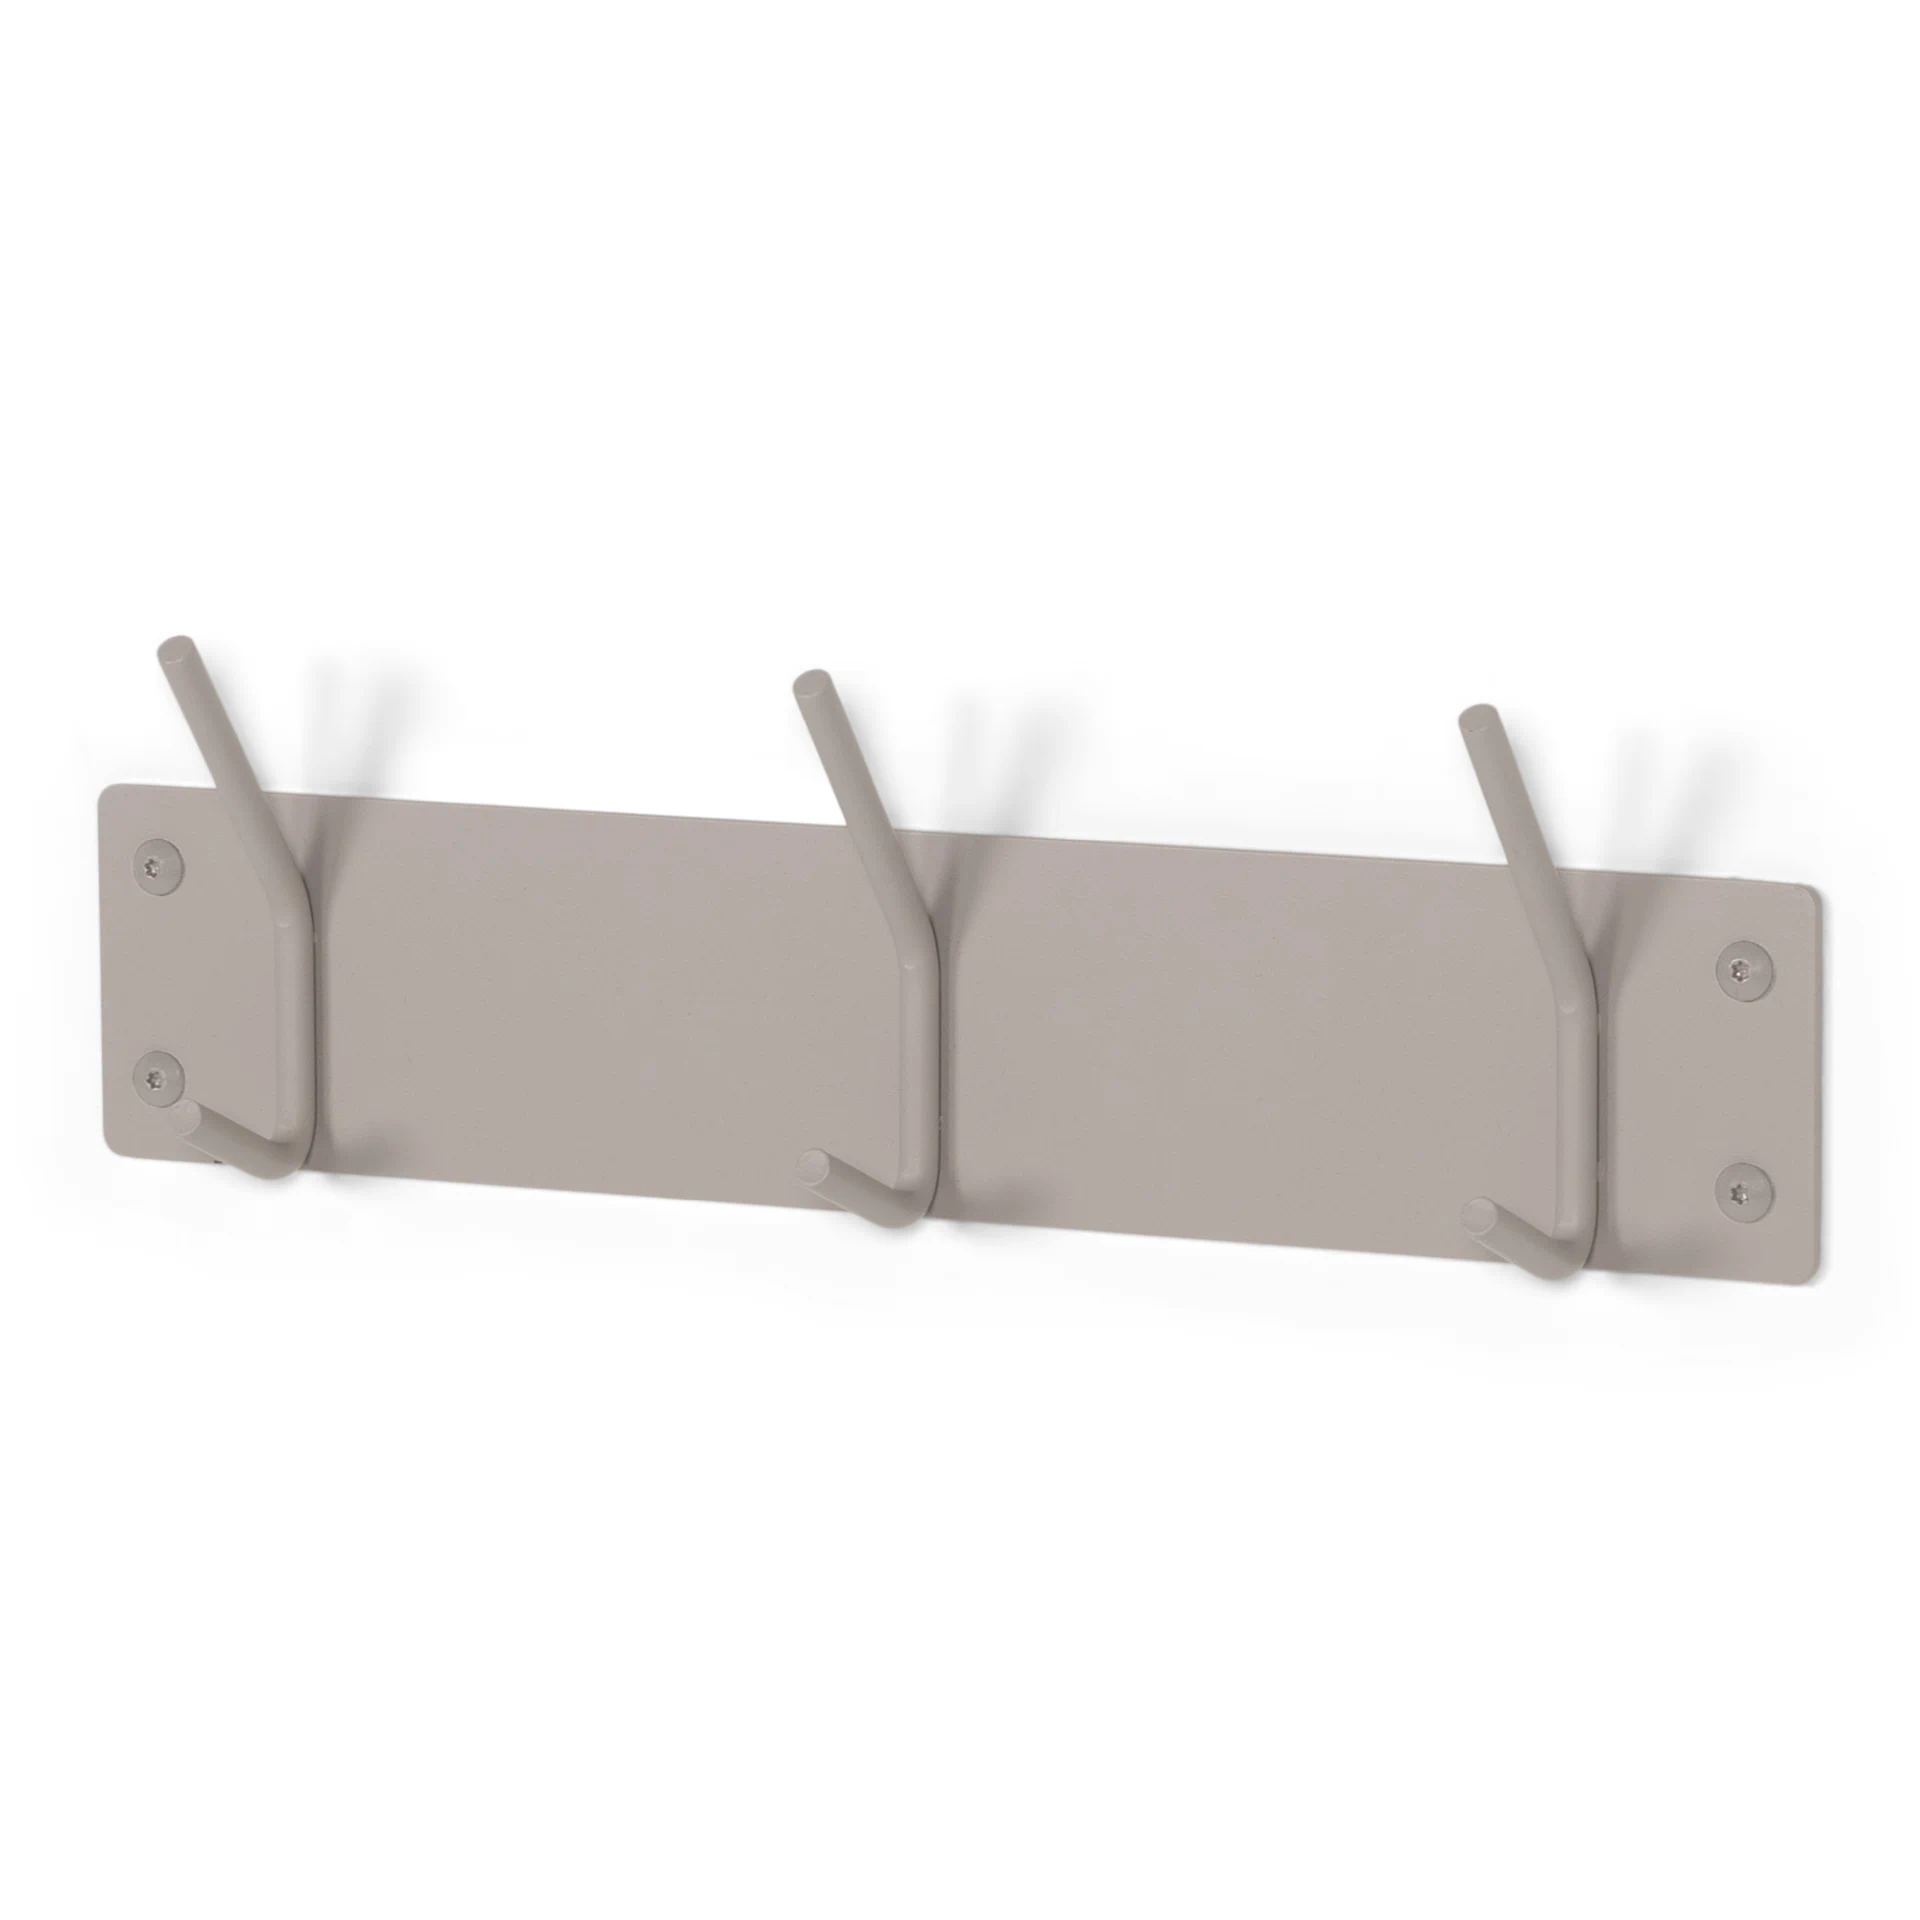 Spinder Design FUSION 3 Wandgarderobe - Silky Taupe